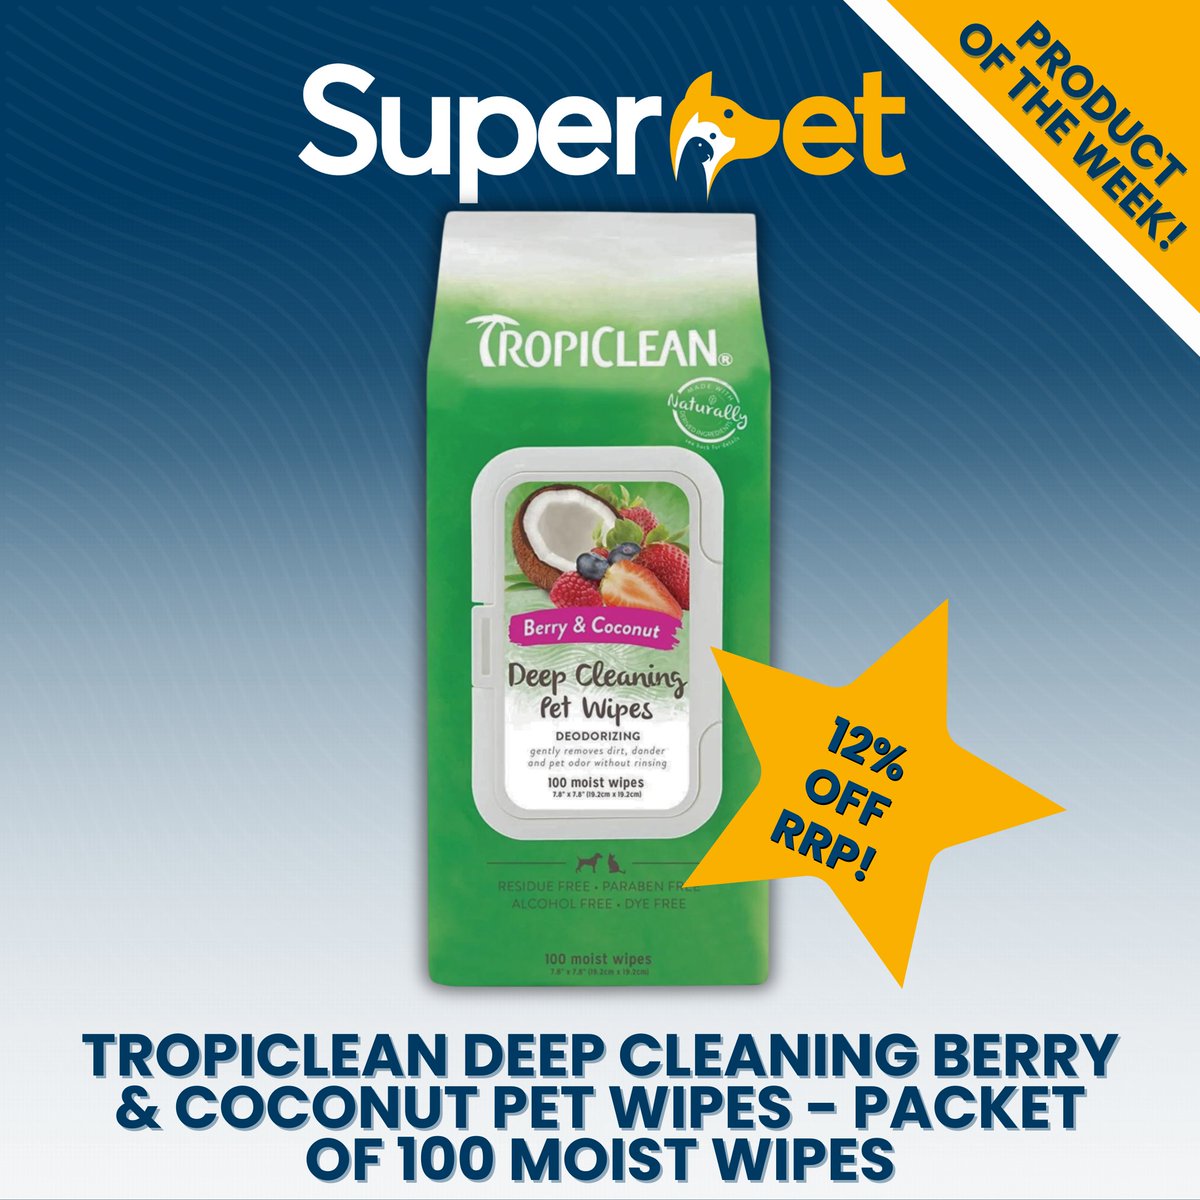 Kickstart allergy season with @tropiclean Deep Cleaning Pet Wipes from Superpet! 🌸🐶 100 moist wipes to combat allergens after those spring walks. Keep your furry friends fresh and your home clean. Shop now: [ow.ly/vVu350ReWP3] #PetCare #AllergySeason